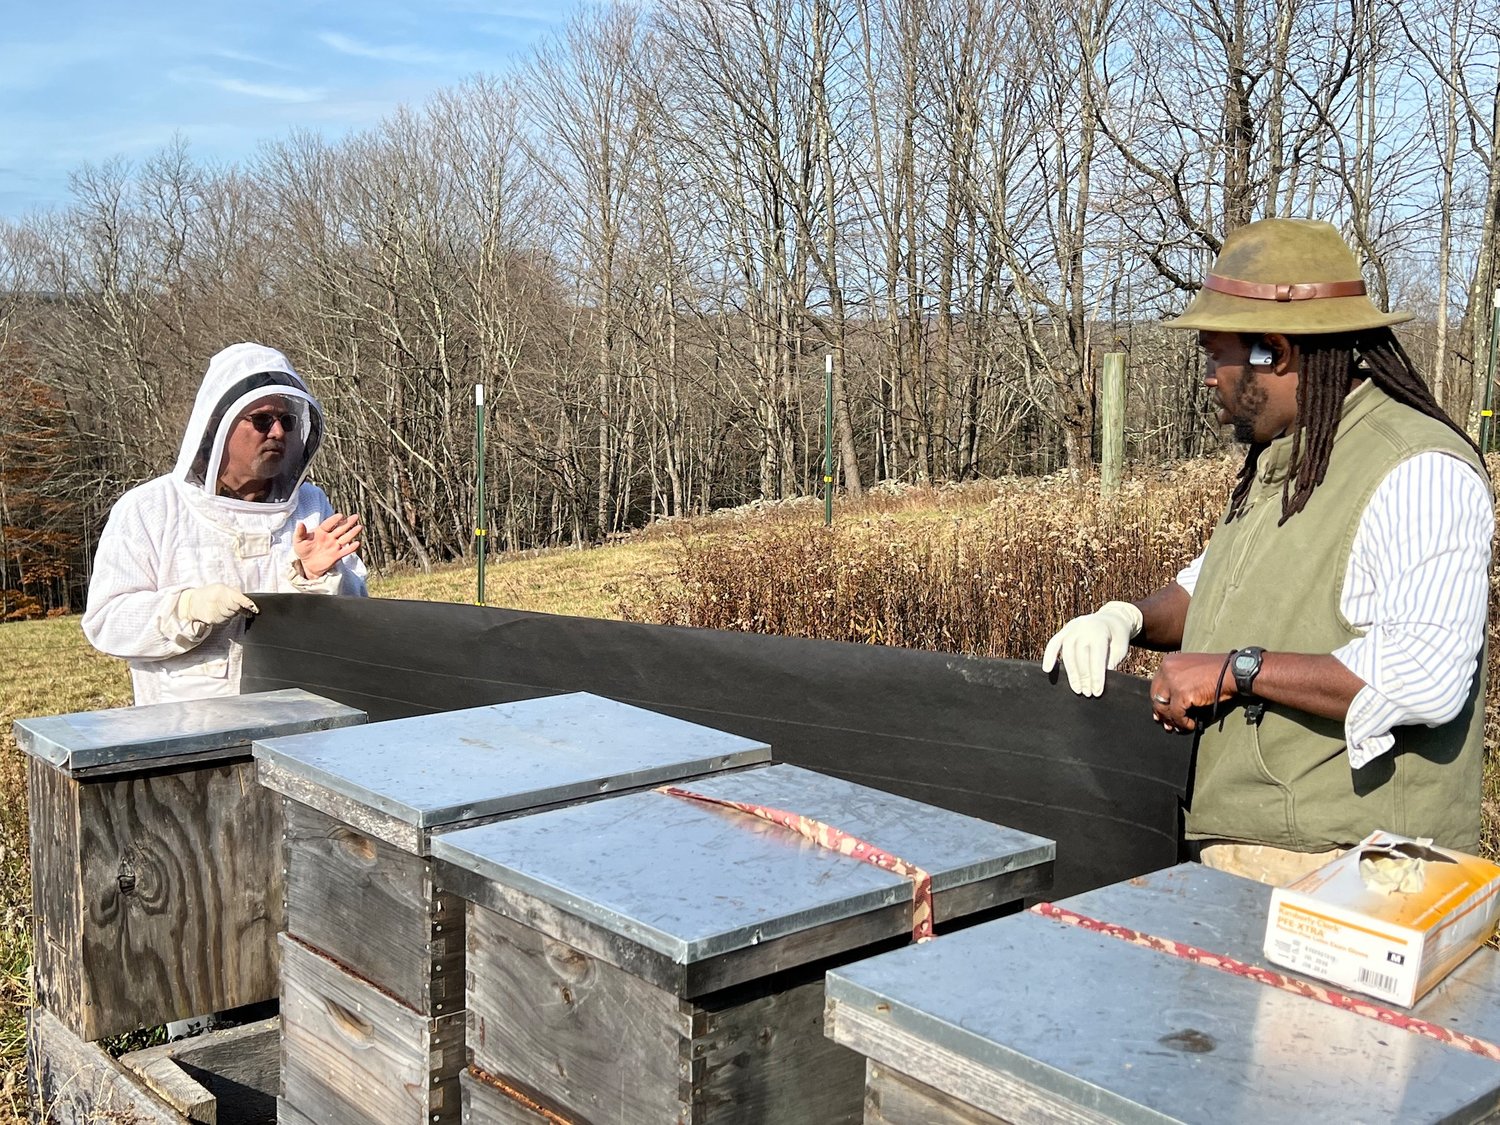 The unsung labor of beekeeping. Here, Art Riegal and a student do fall-related chores.